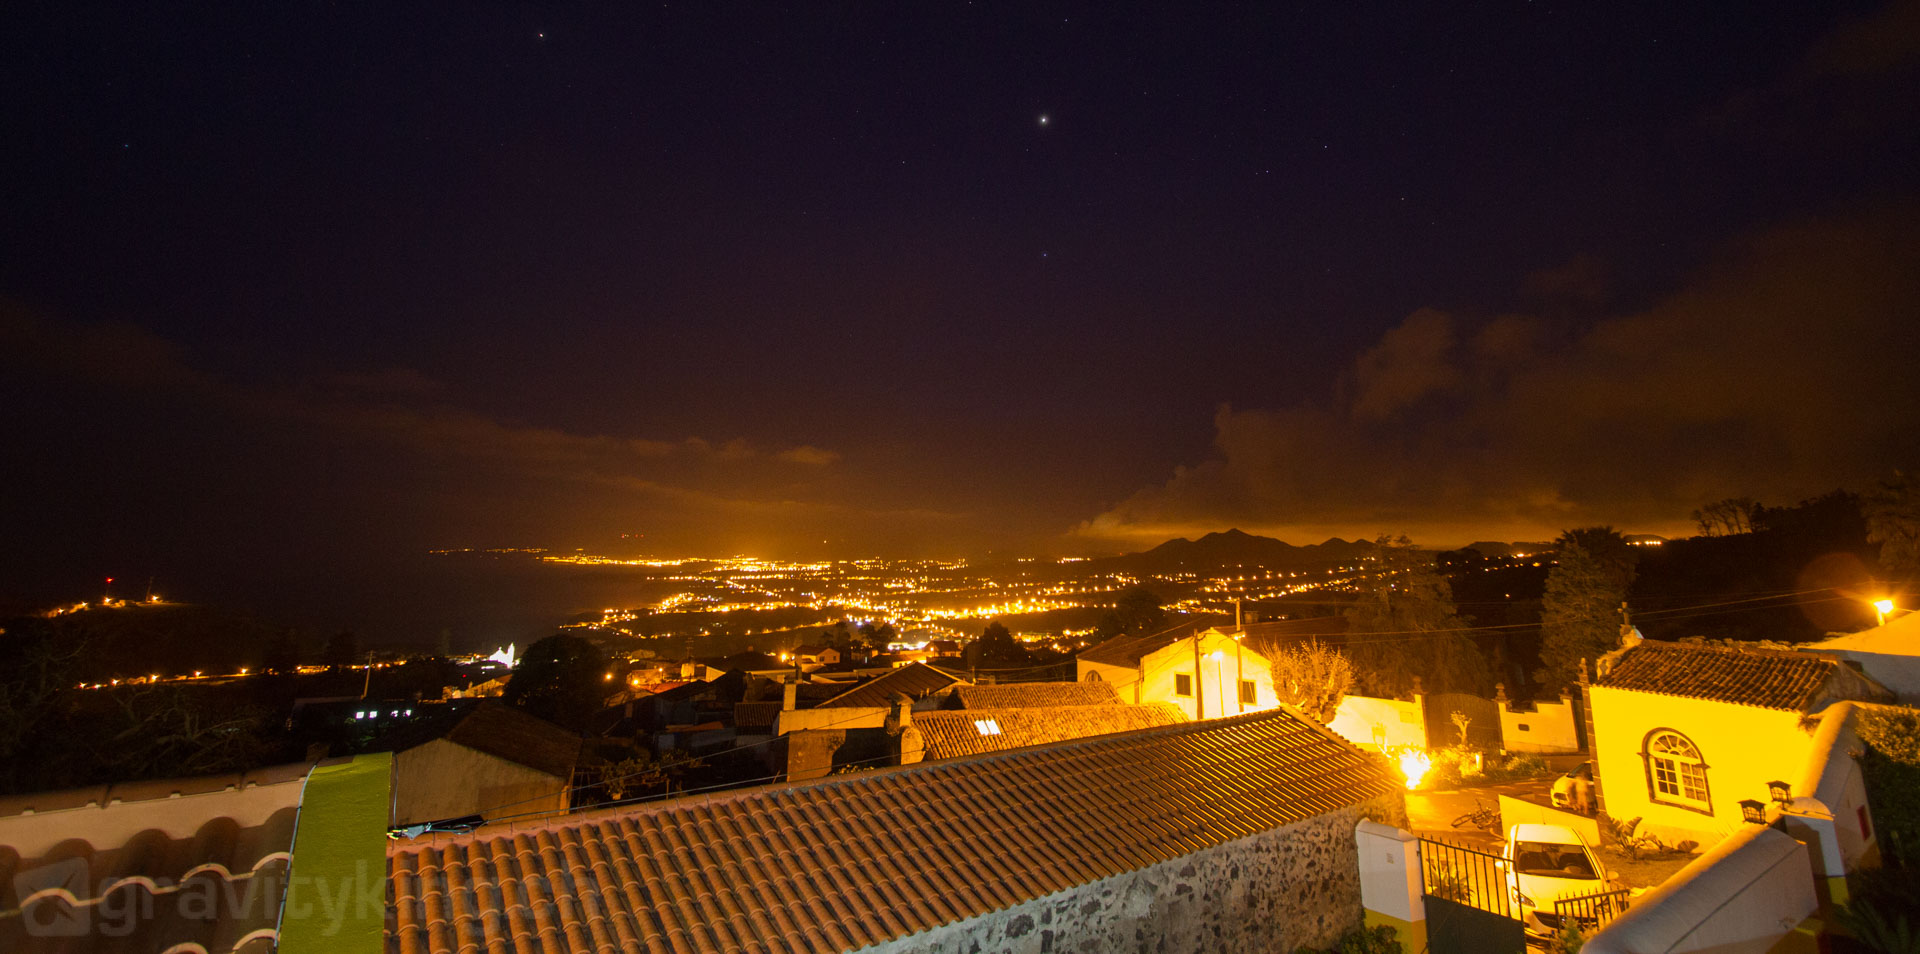 The view from the surfhouse at night. Capelas, São Miguel, Azores